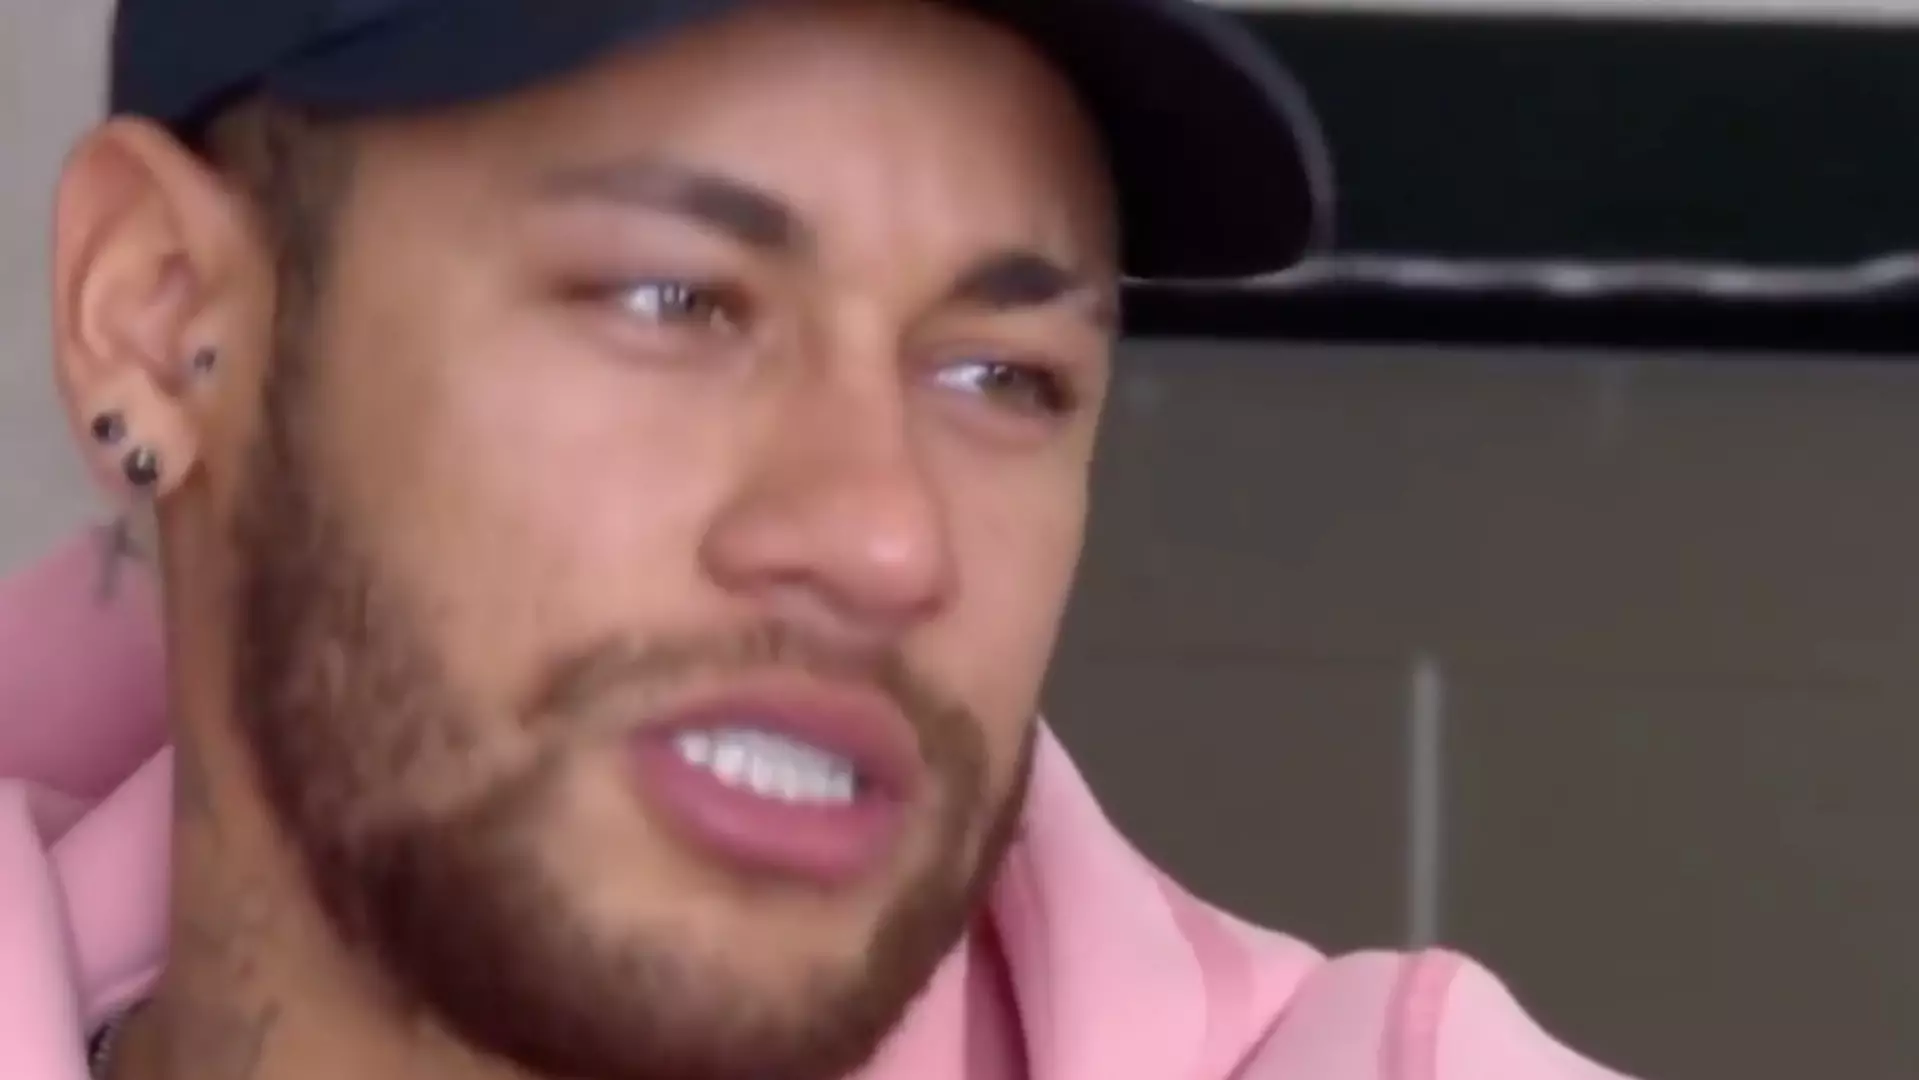 Neymar Breaks Down In Tears While Talking About Lionel Messi During His Barcelona Days